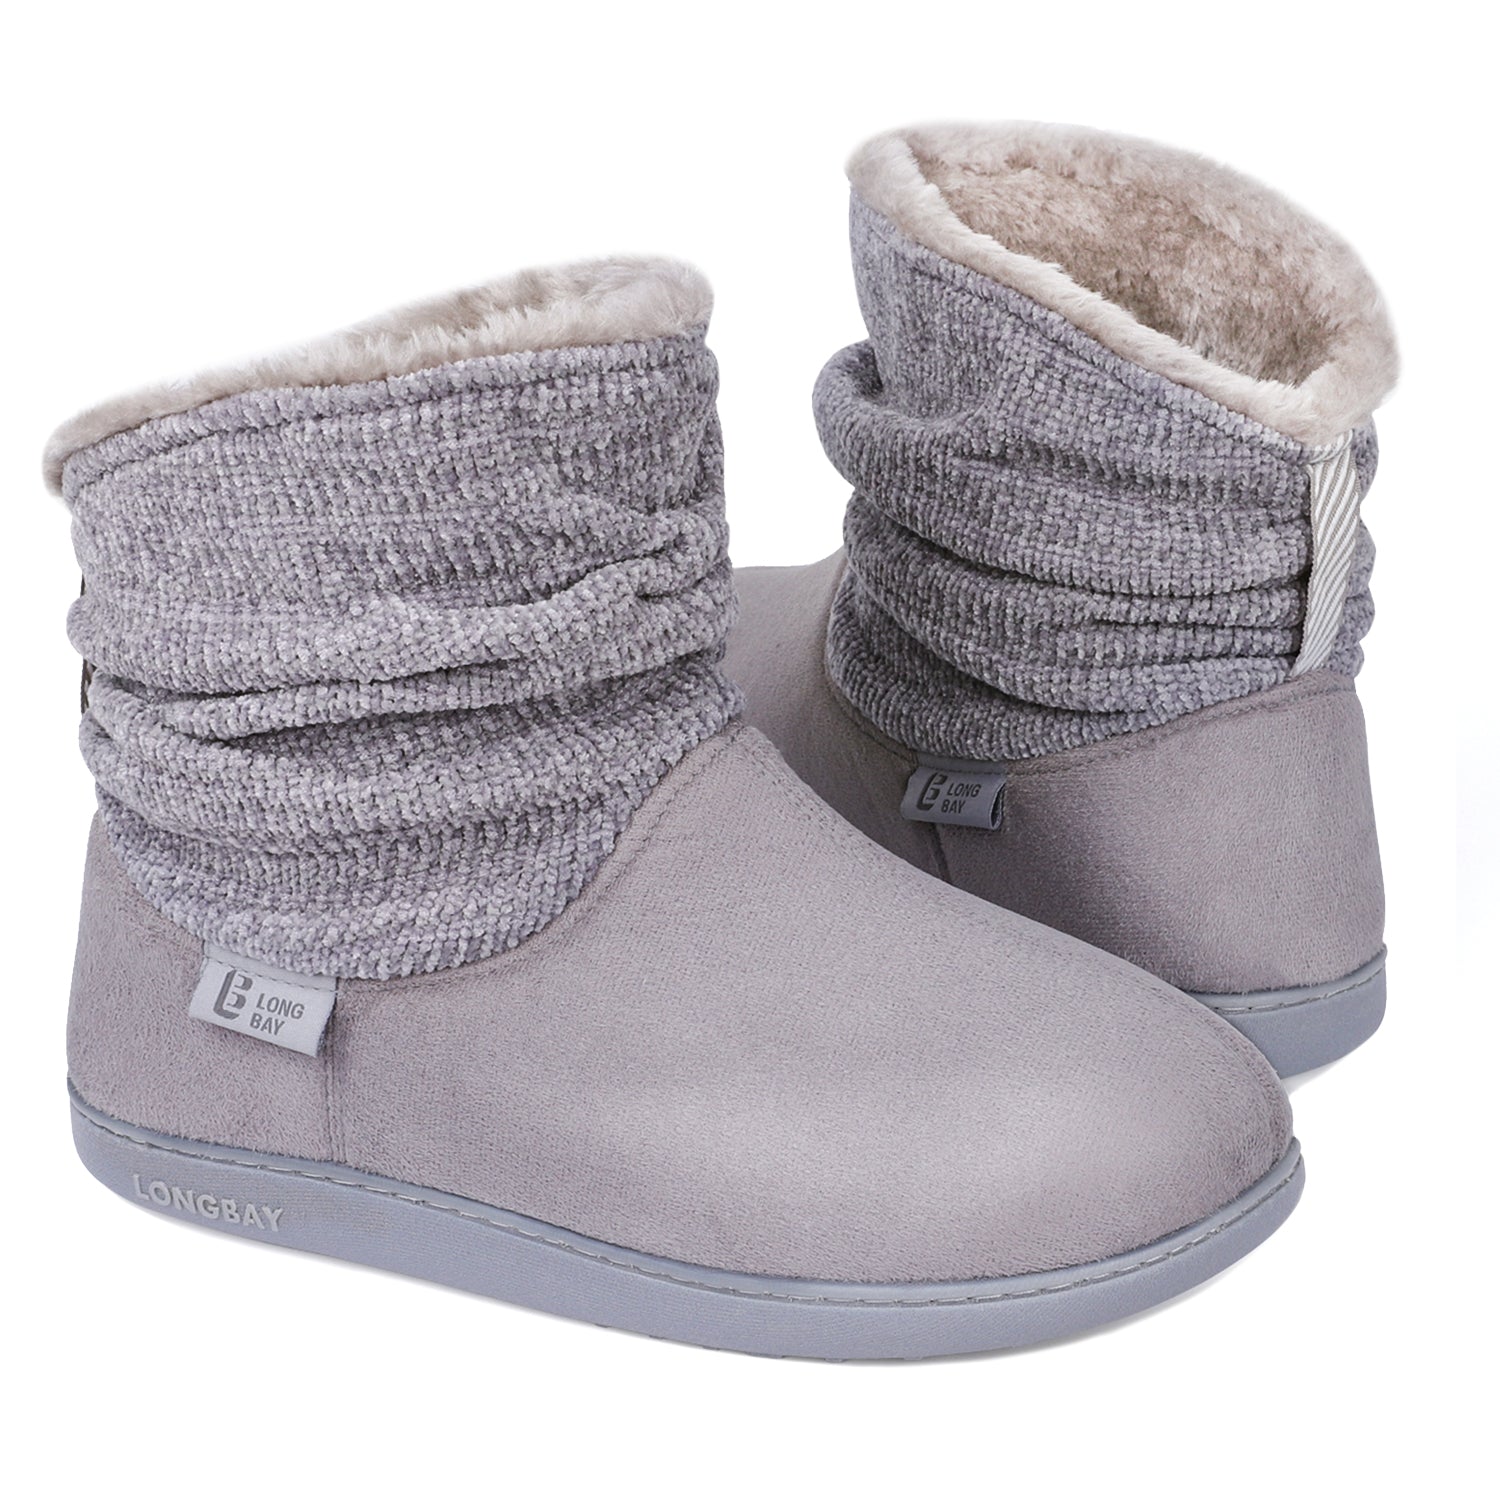 Himalayan Women's Chenille Knit Bootie Slippers - Grey - The Marquet, UK Slipper Wholesaler & Distributor